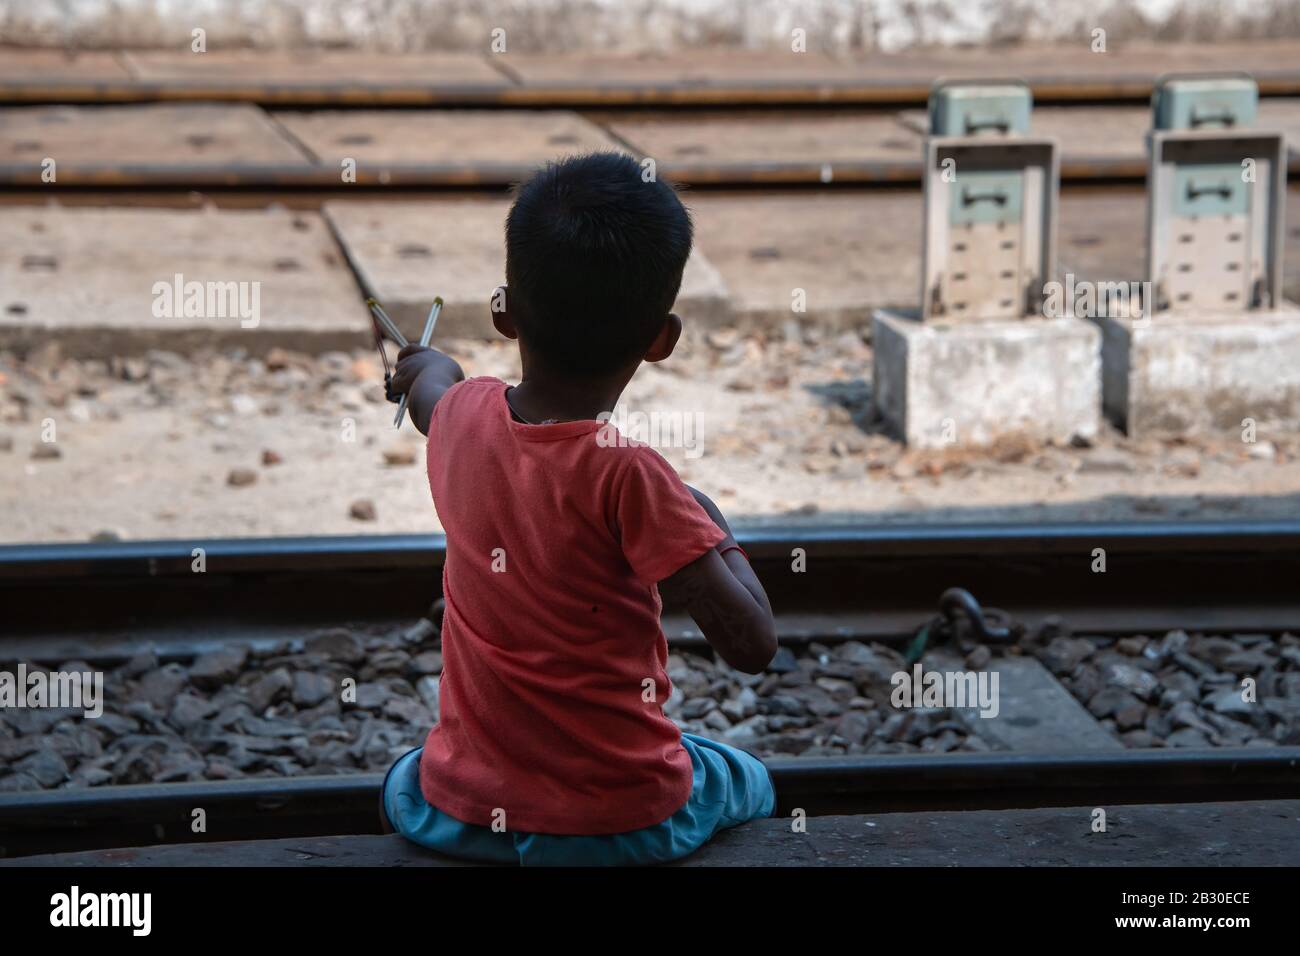 Yangon, Myanmar - January 2020: Young Asian boy playing with a simple homemade catapult alongside railway tracks, Stock Photo